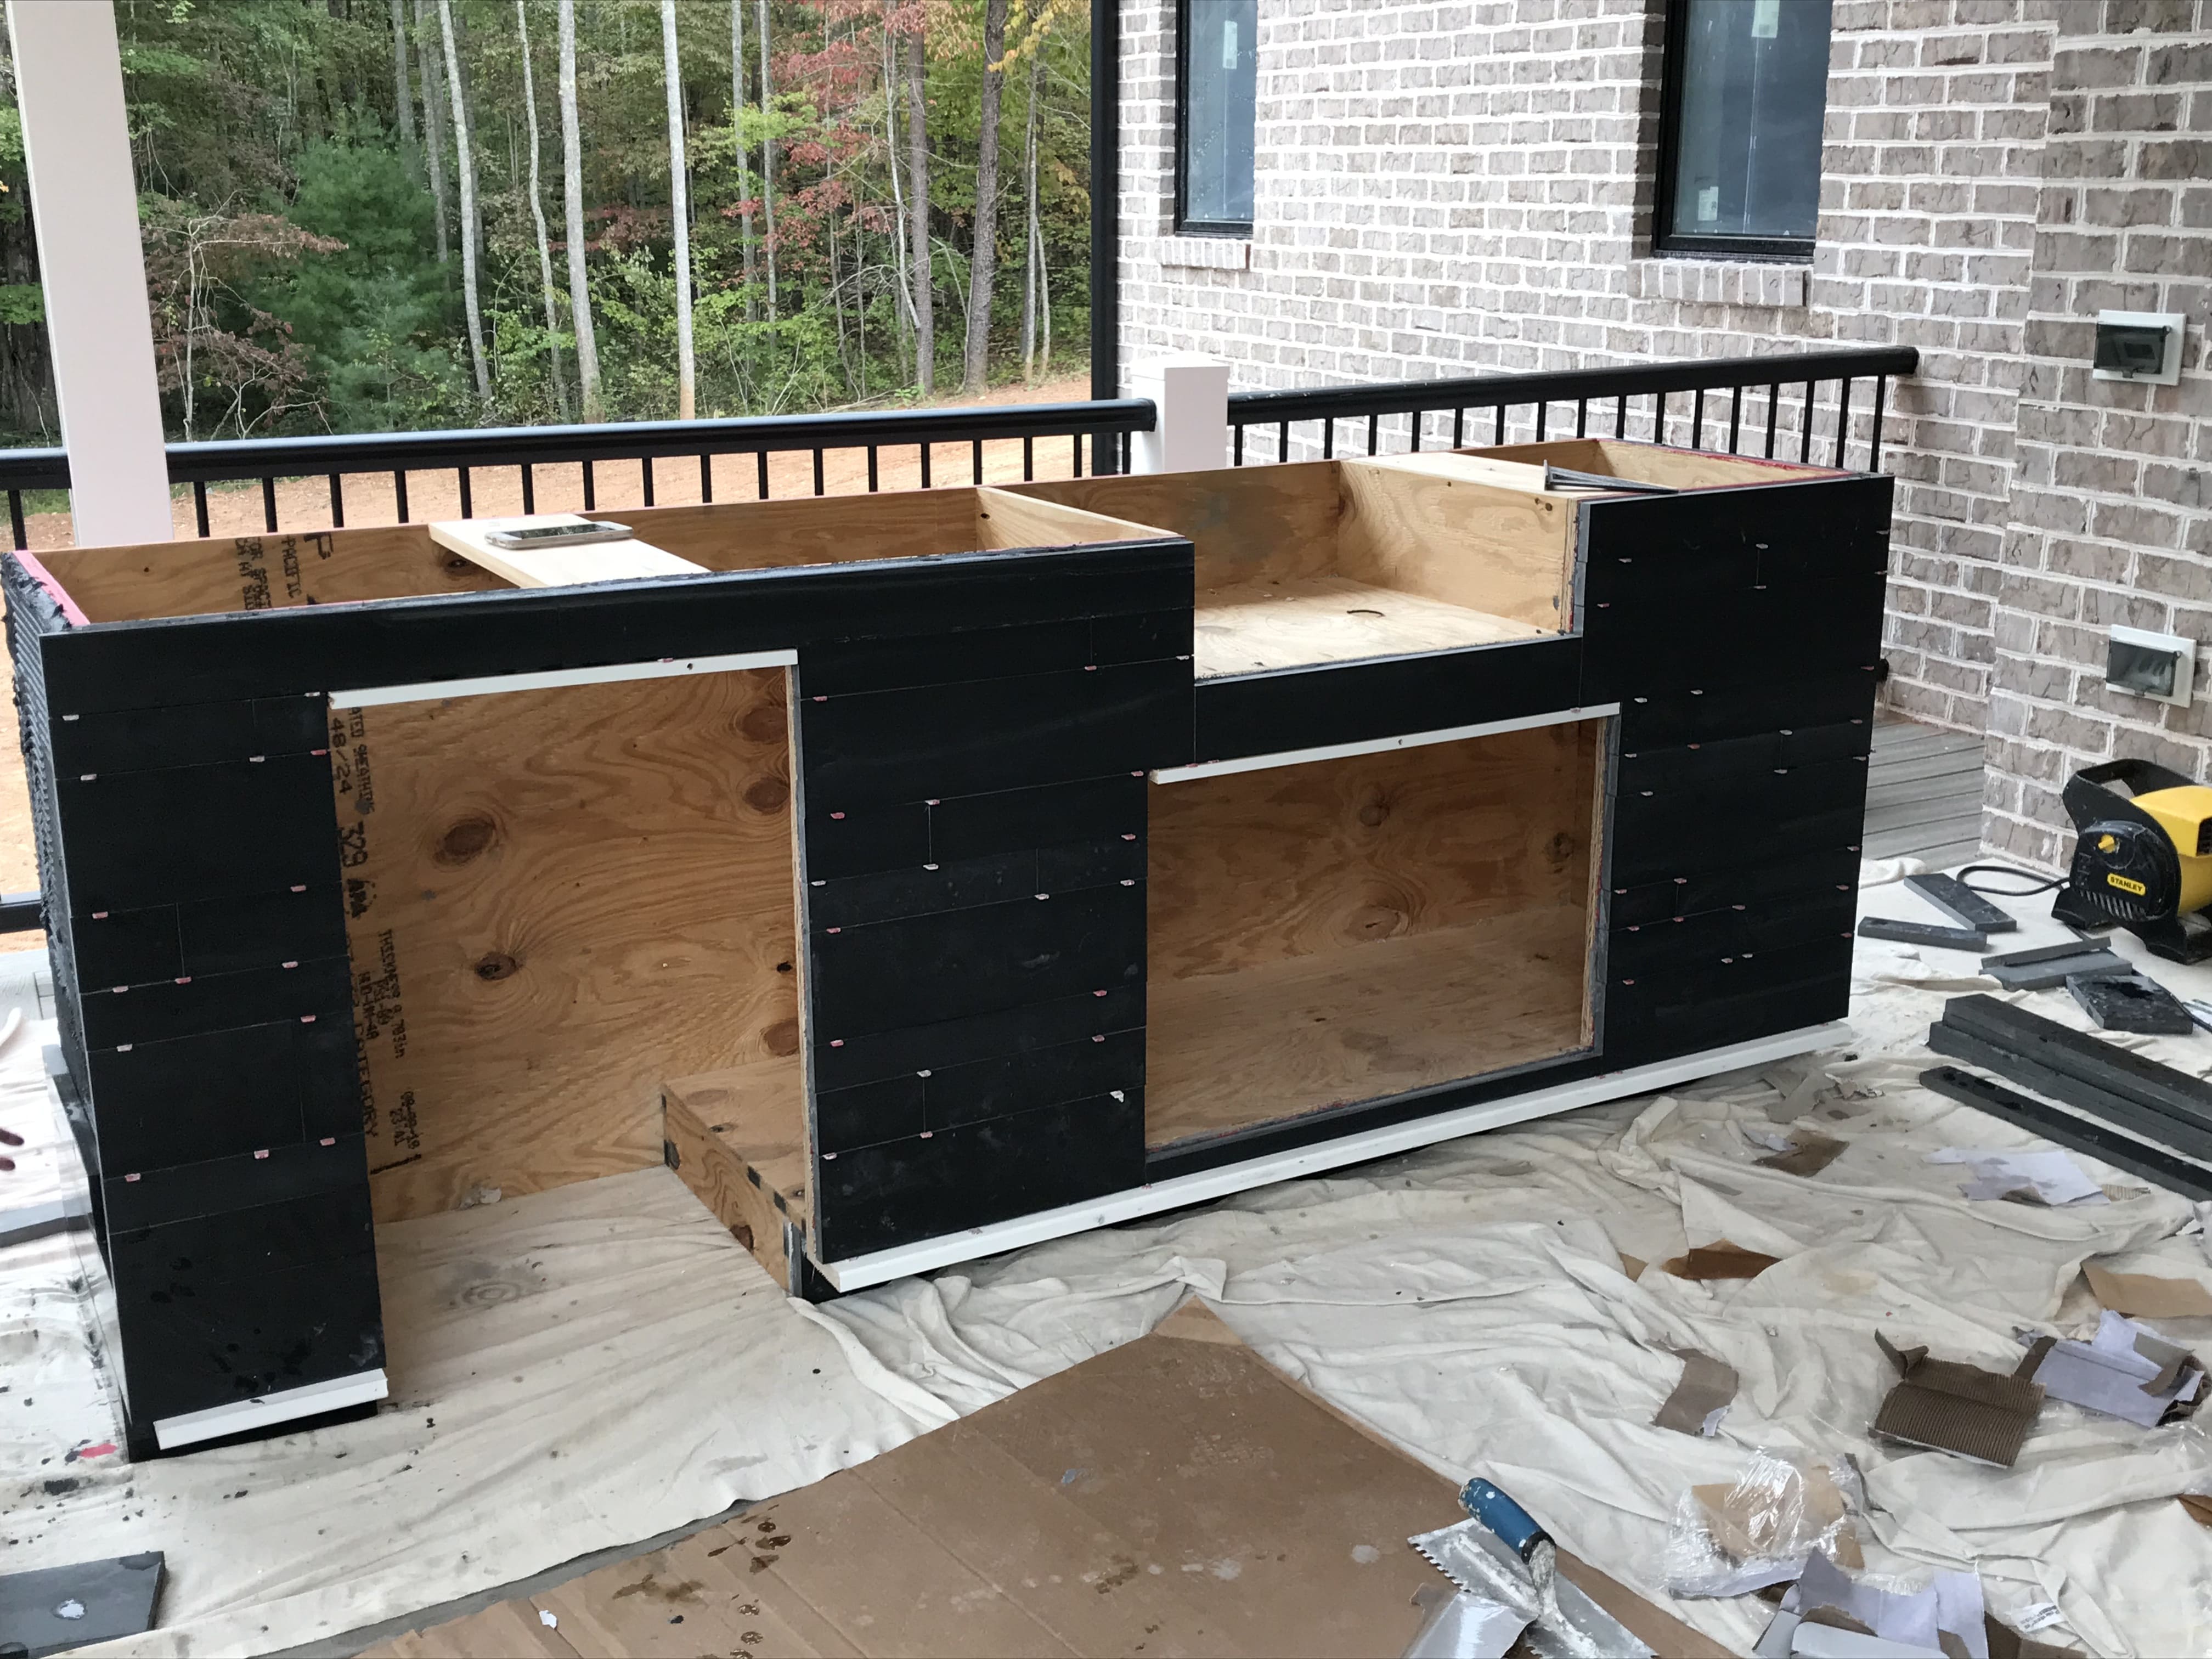 Norstone Ebony Planc Large Format Tile Being installated on a residential outdoor kitchen project